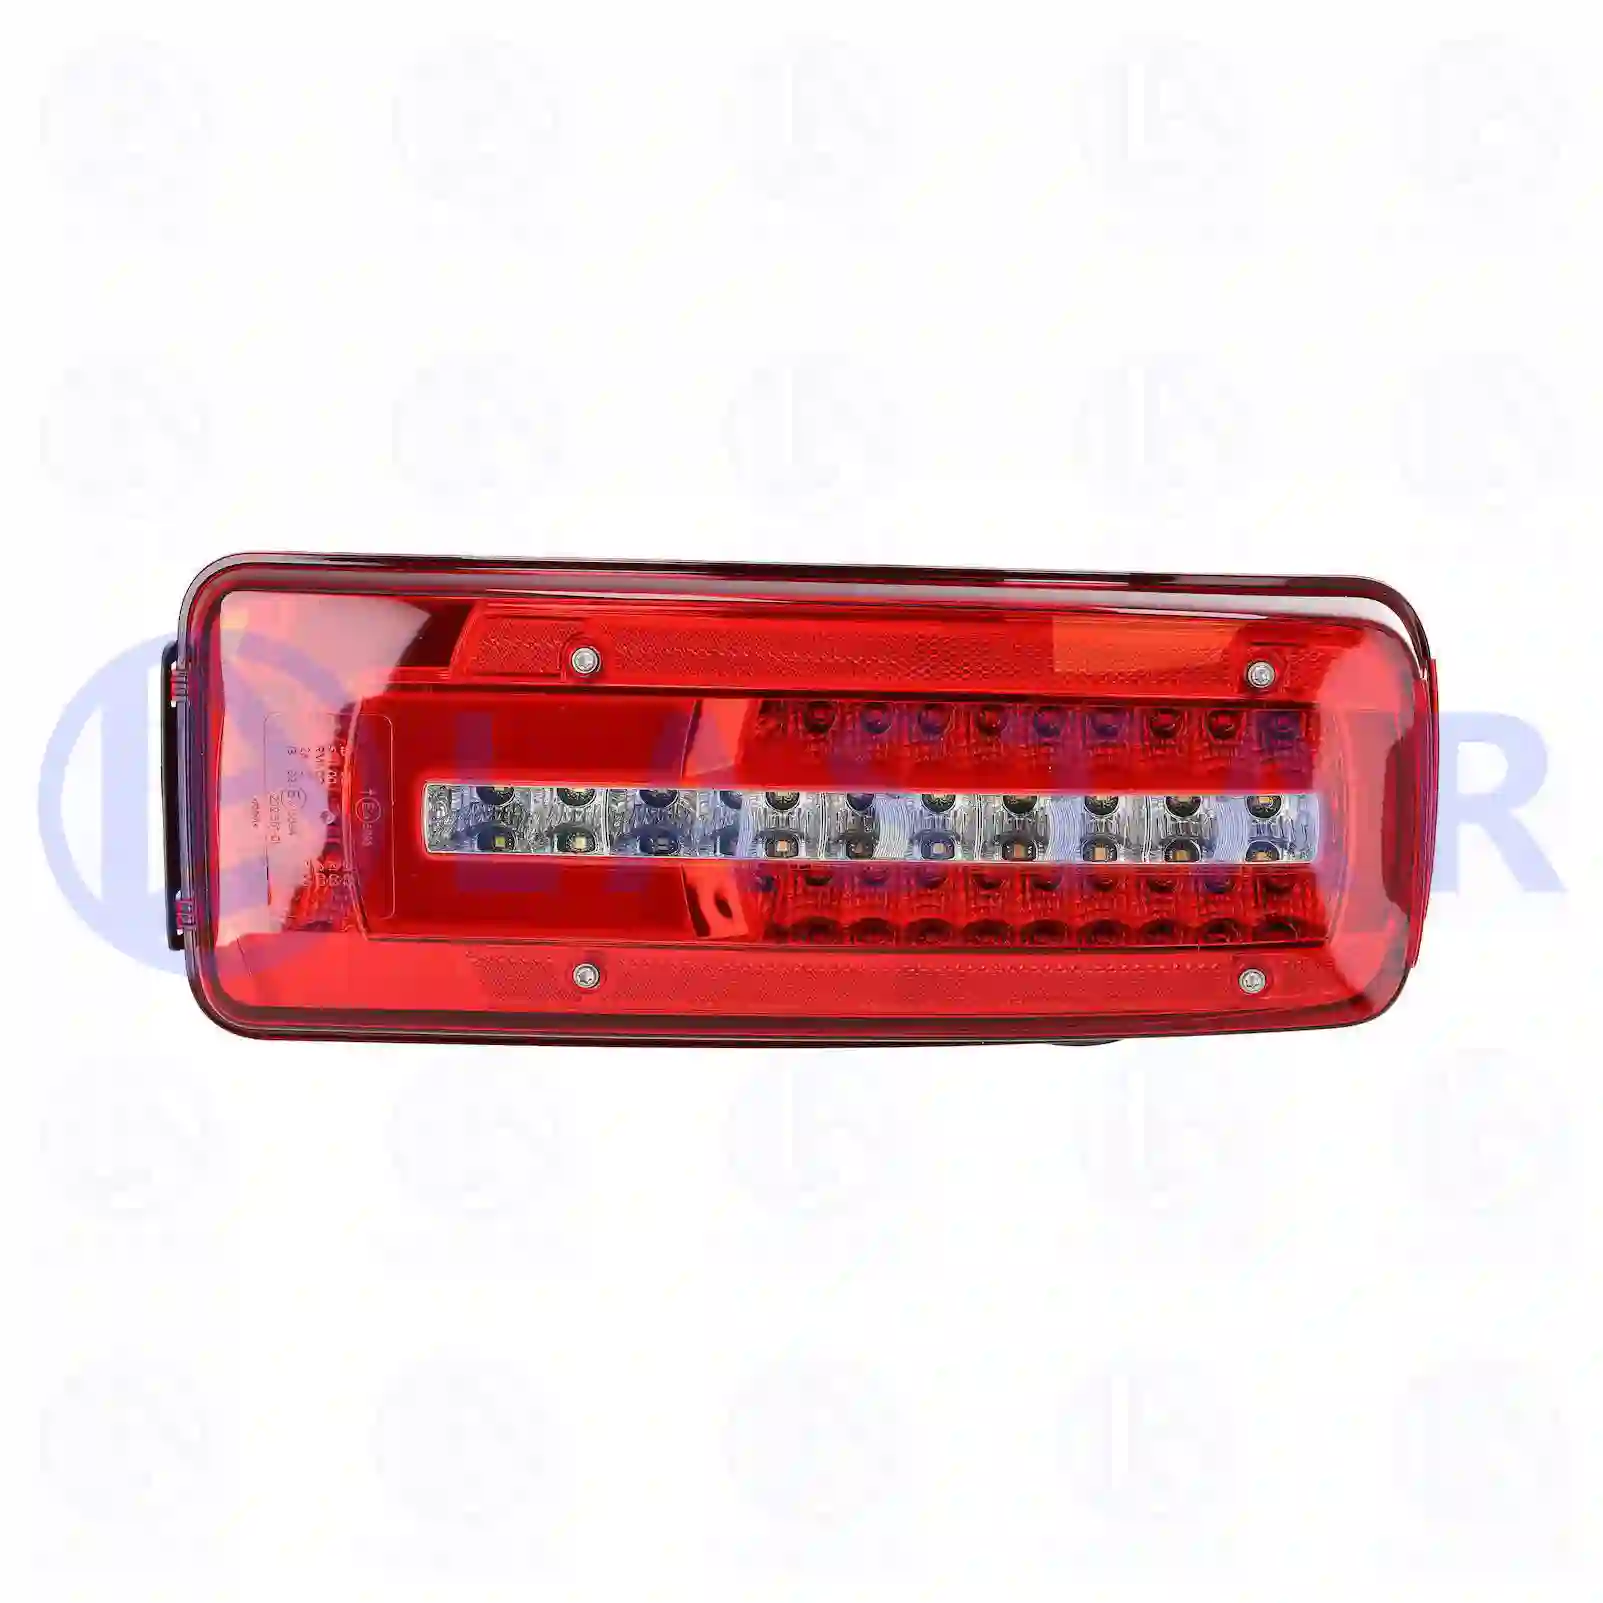 Tail lamp, right, with reverse alarm, 77712606, 2007616 ||  77712606 Lastar Spare Part | Truck Spare Parts, Auotomotive Spare Parts Tail lamp, right, with reverse alarm, 77712606, 2007616 ||  77712606 Lastar Spare Part | Truck Spare Parts, Auotomotive Spare Parts